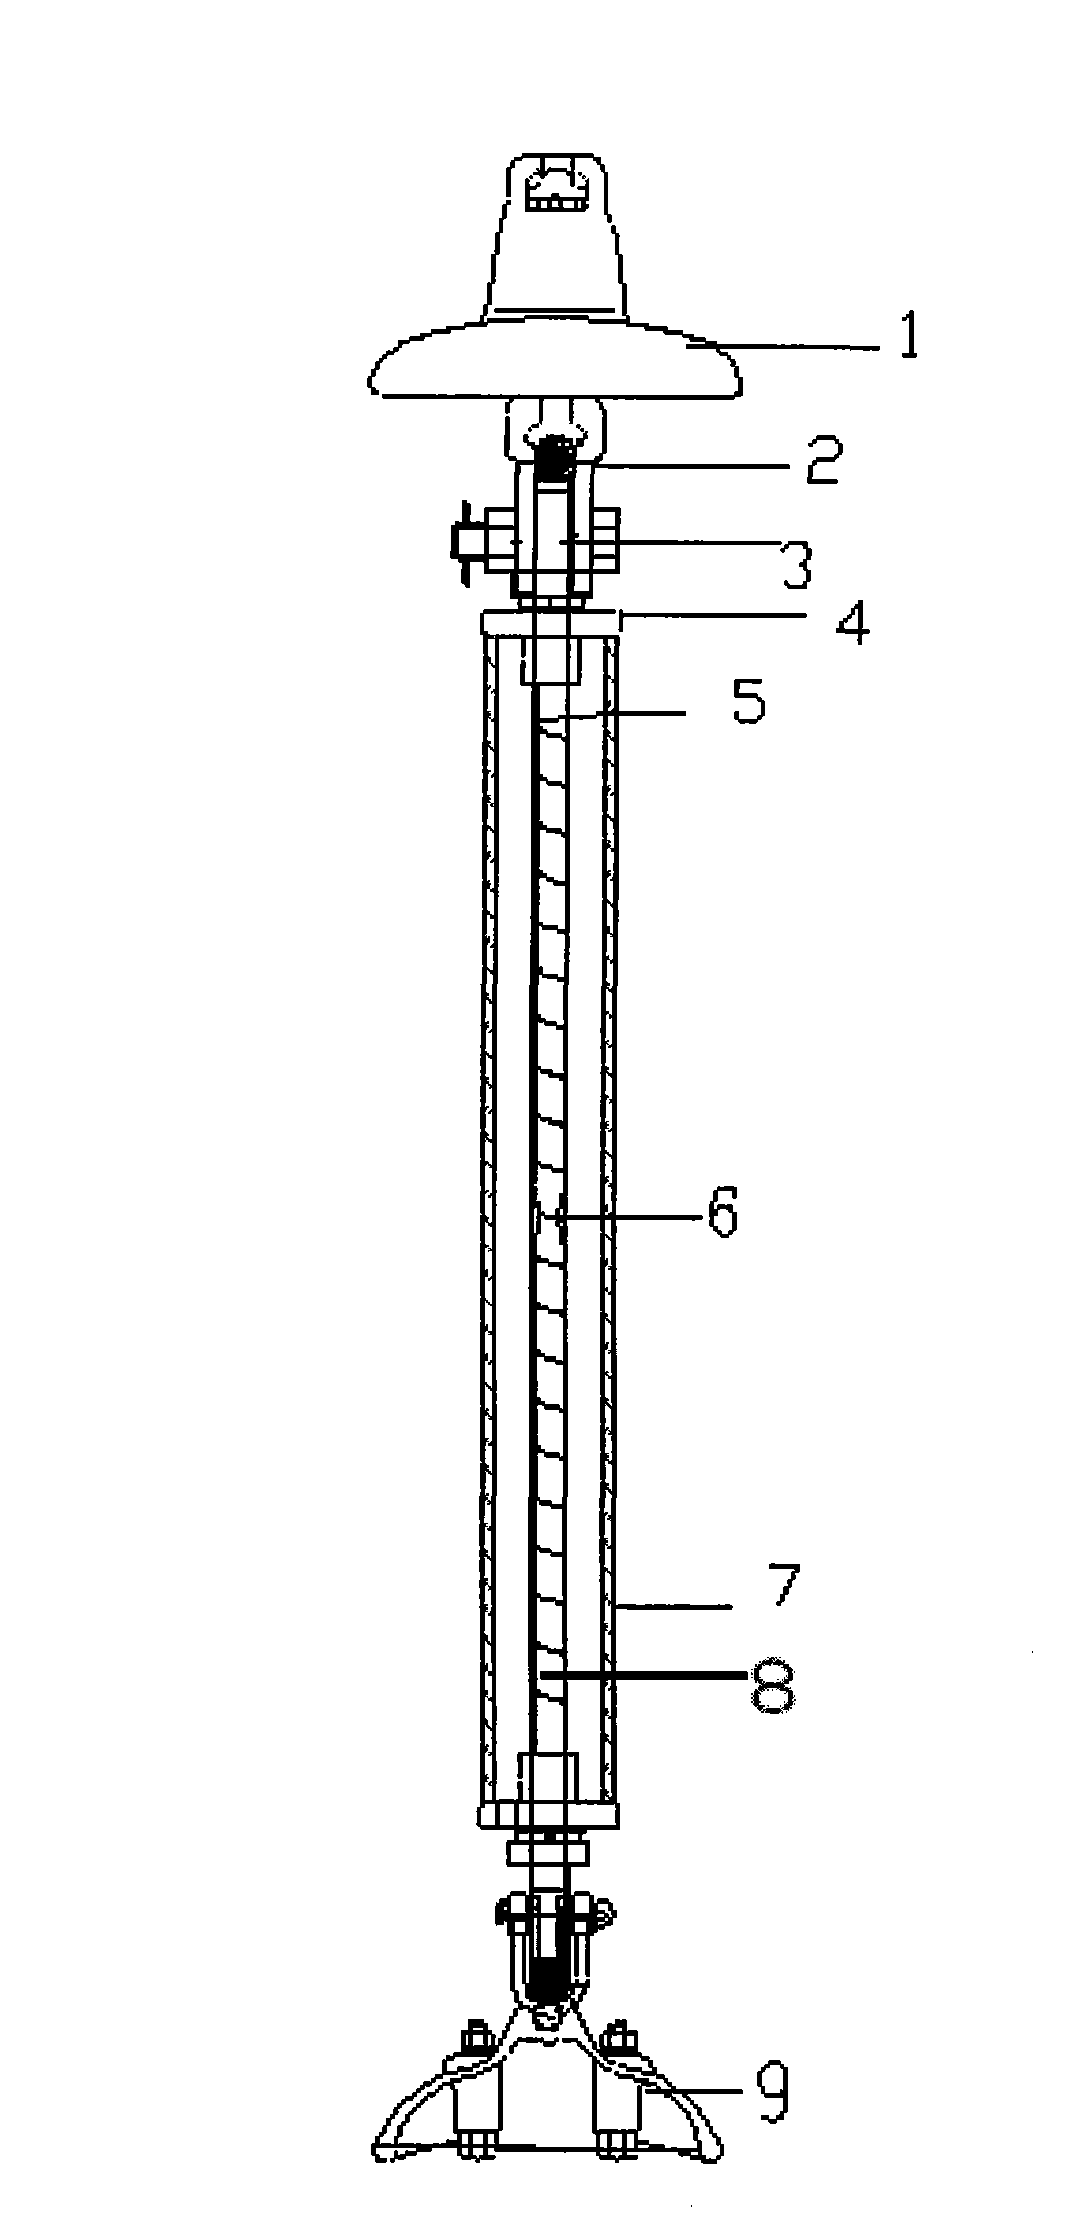 Device for preventing power transmission tower from collapsing caused by overload